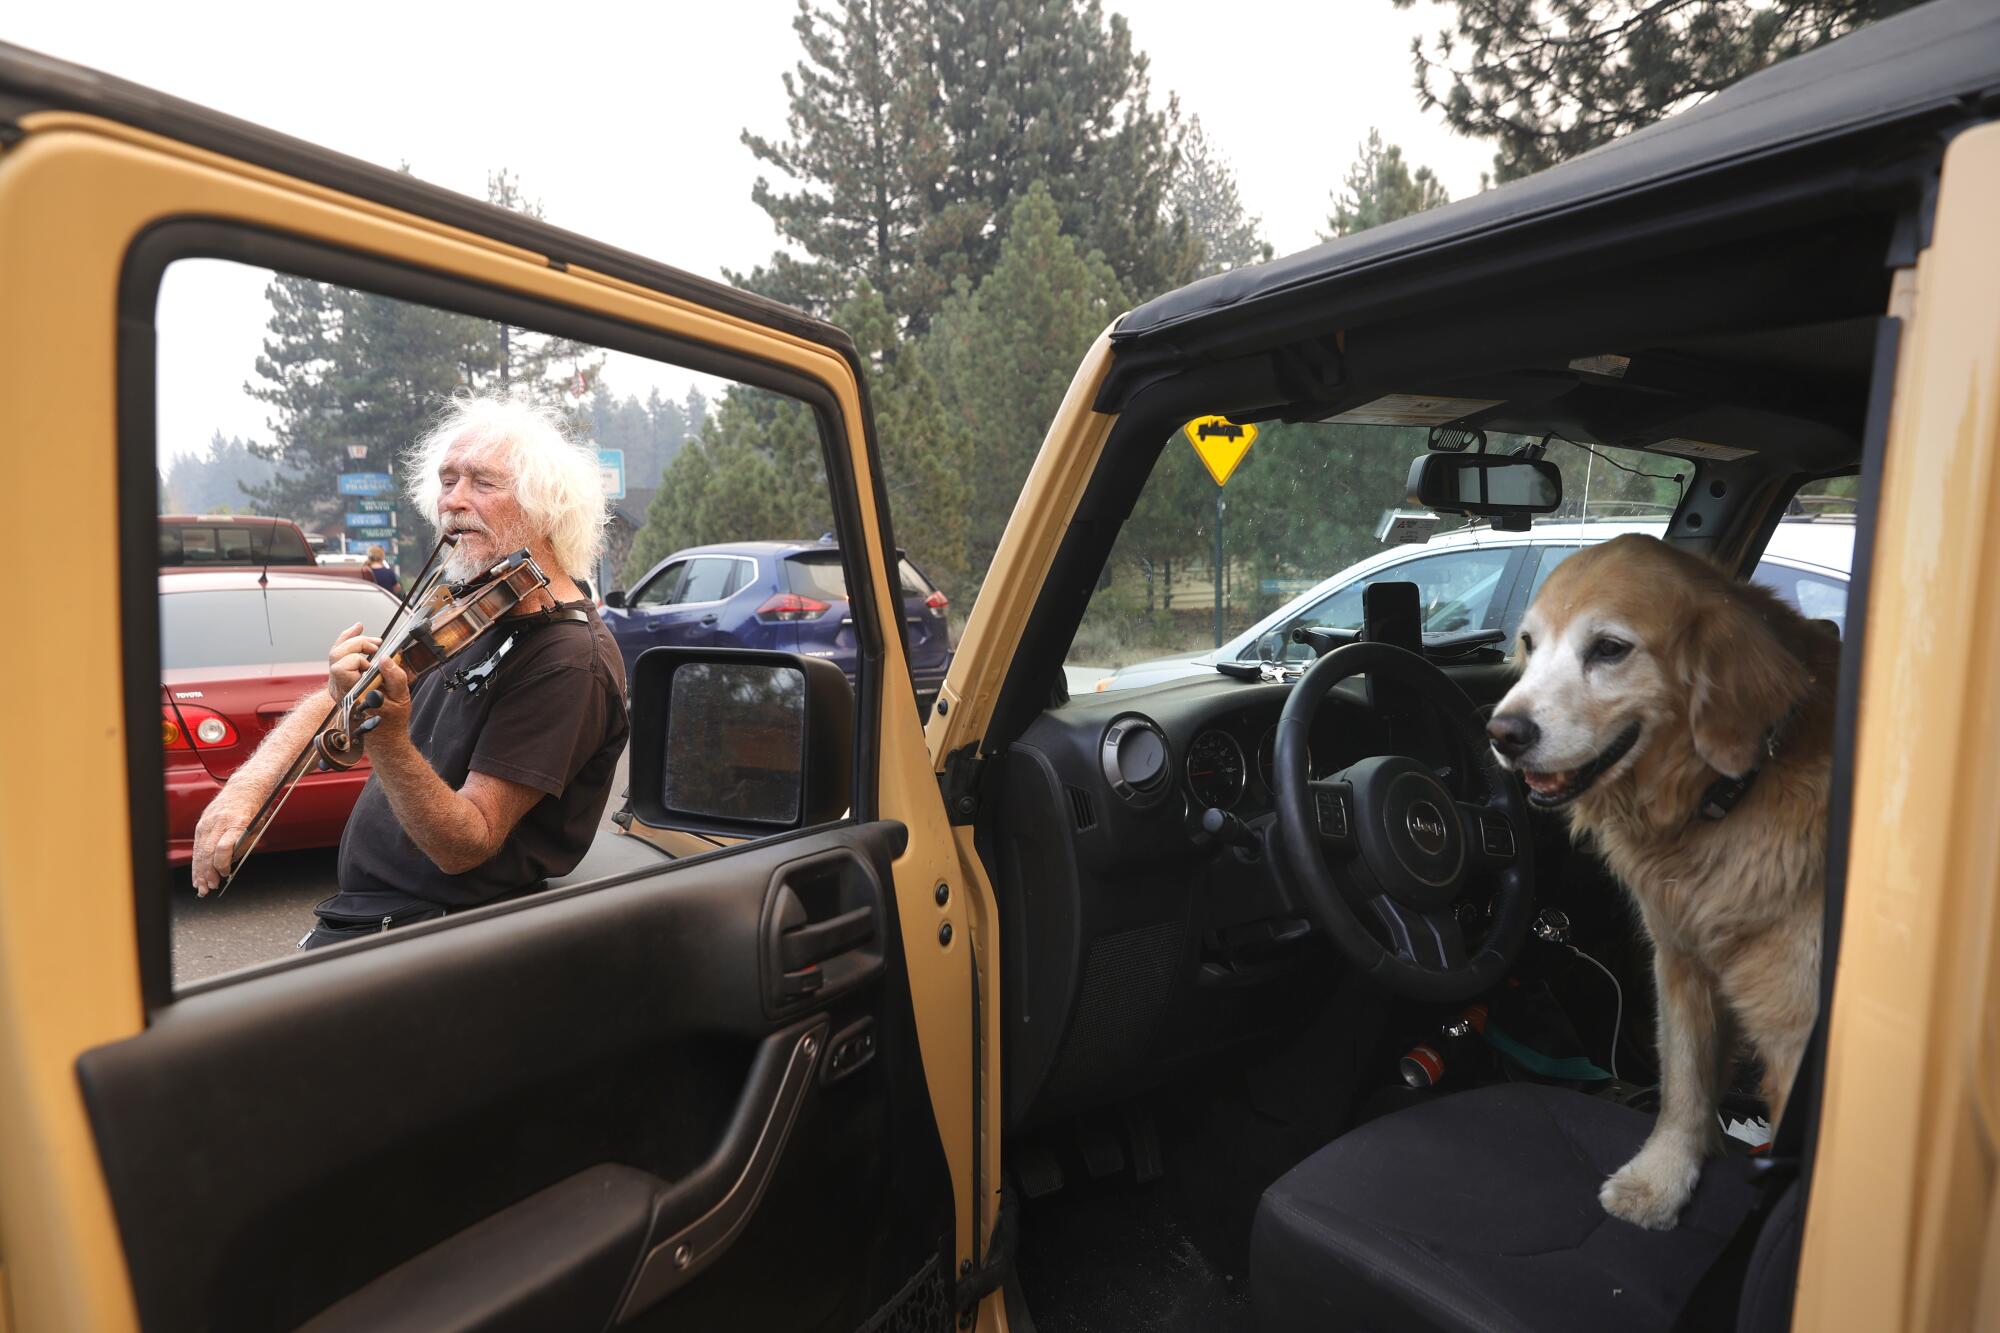 Evacuee Mel Smothers plays the violin as he waits in a miles-long traffic jam on Highway 50